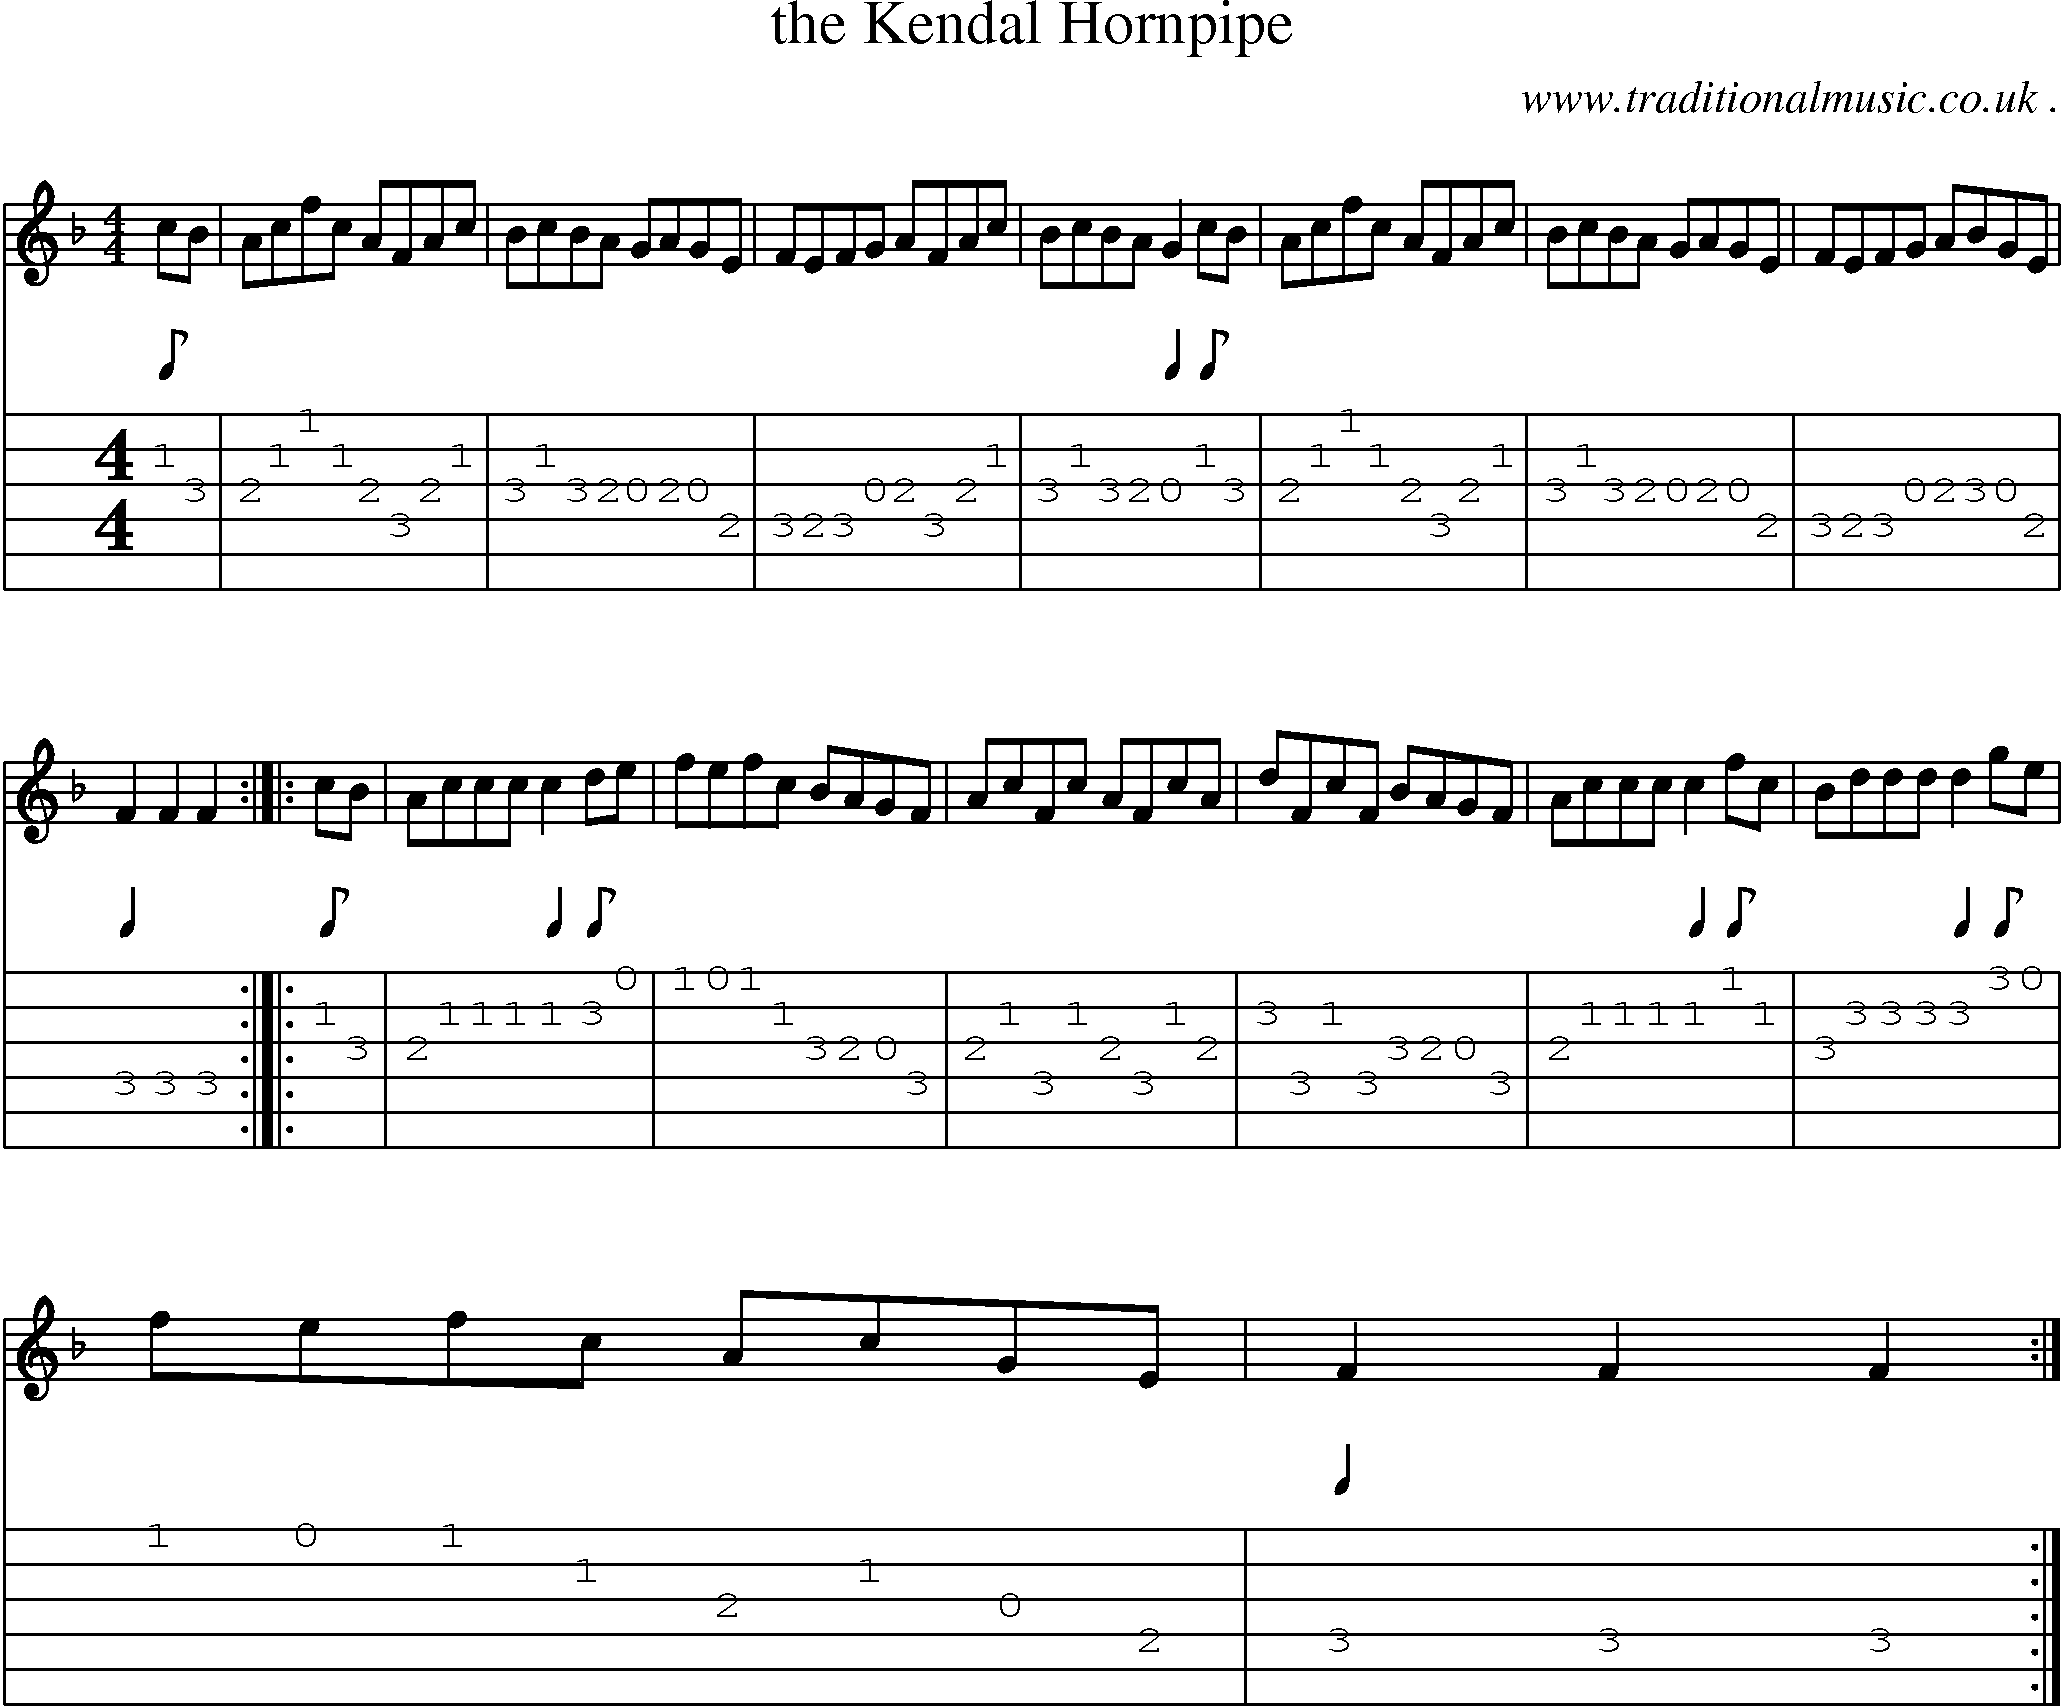 Sheet-Music and Guitar Tabs for The Kendal Hornpipe